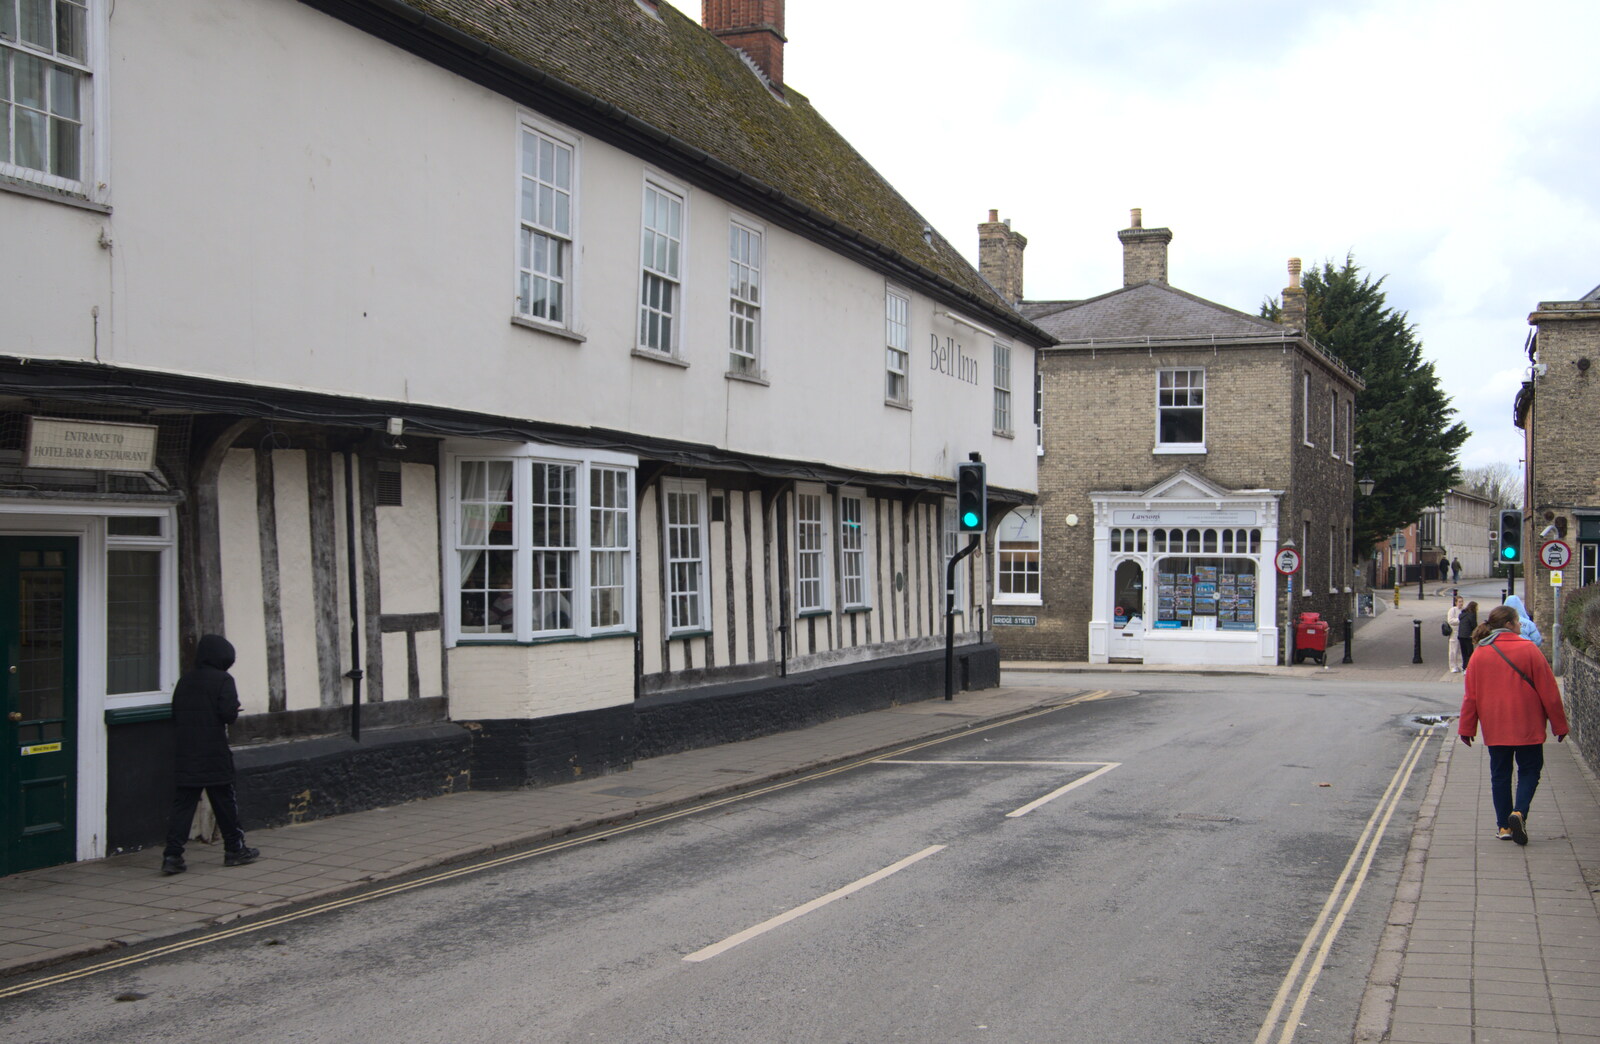 The Bell Inn - our lunch-stop location from A Postcard from Thetford, Norfolk - 15th March 2023